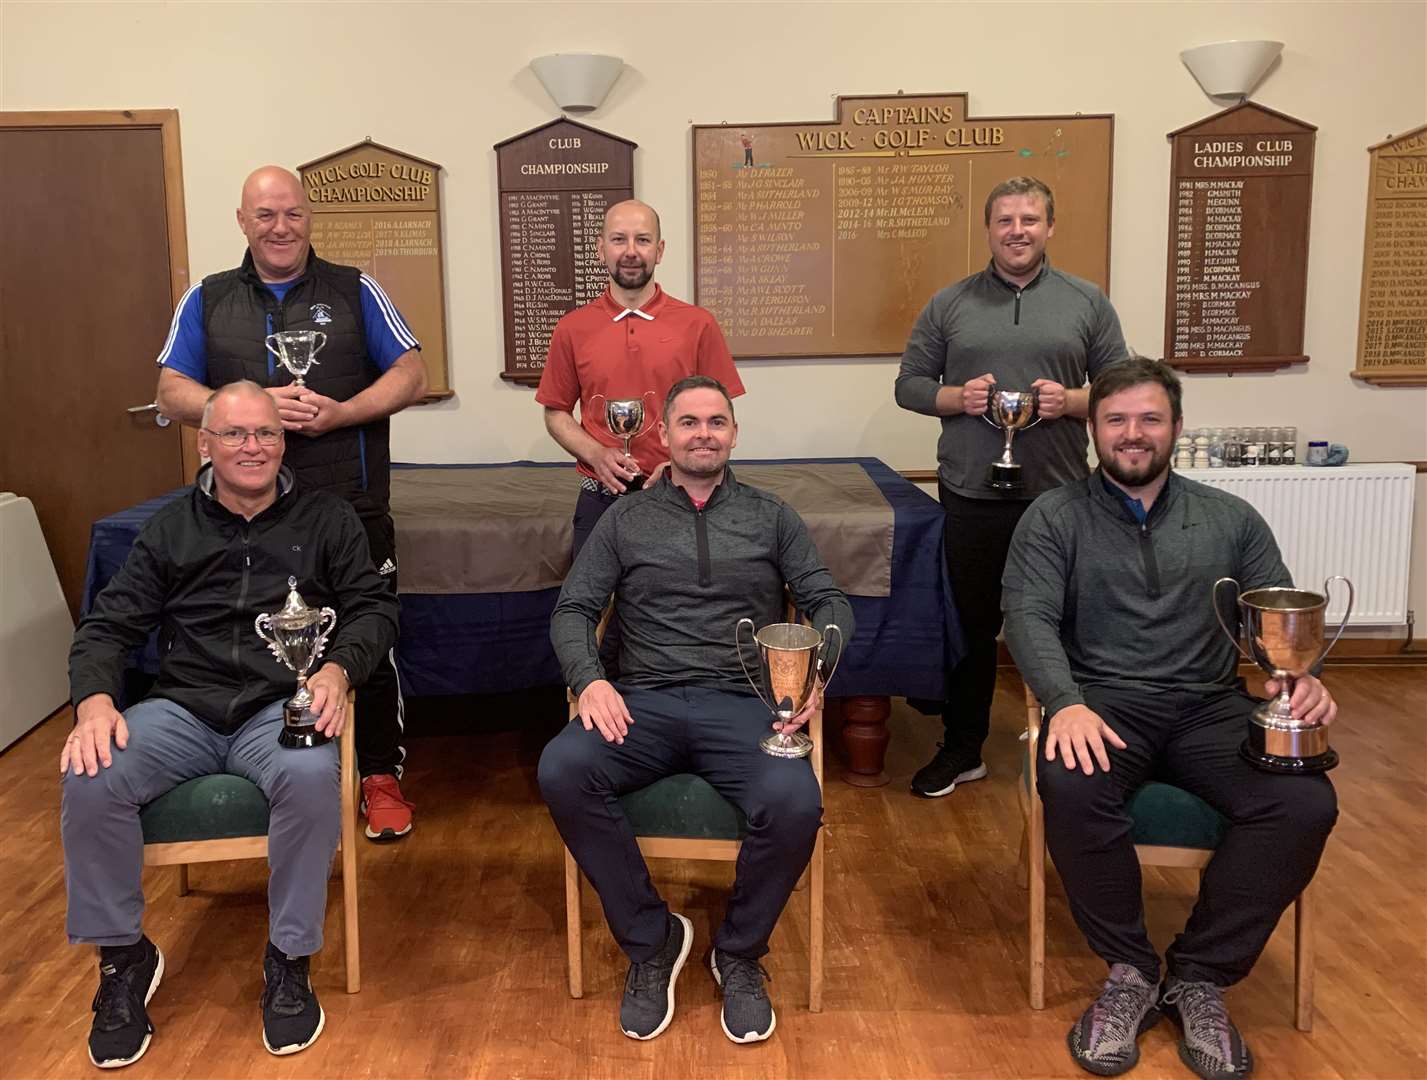 Back row (from left): Alan Farquhar, senior strokeplay champion; Alan Forbes, scratch strokeplay champion; Mark Mackay, handicap strokeplay champion. Front: Peter Taylor, senior club champion; Gordie Steven, club champion; Graeme Mackay, handicap club champion.